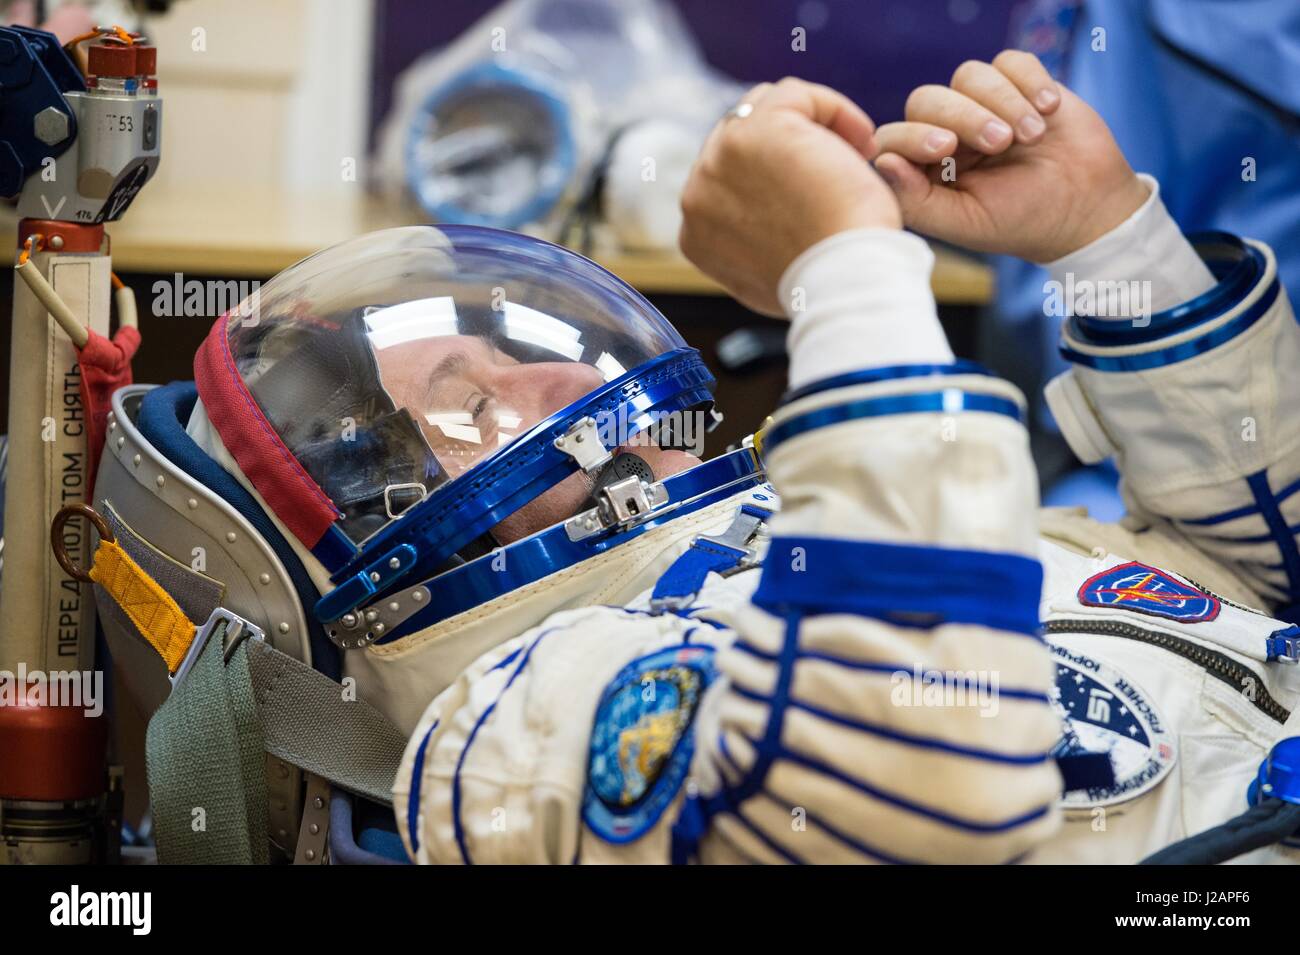 NASA International Space Station Expedition 51 prime crew member Russian cosmonaut Fyodor Yurchikhin of Roscosmos has his Russian Sokol launch and entry spacesuit pressure-checked in preparation for the Soyuz MS-04 launch at the Baikonur Cosmodrome April 20, 2017 in Baikonur, Kazakhstan.   (photo by Andrey Shelepin /NASA via Planetpix) Stock Photo